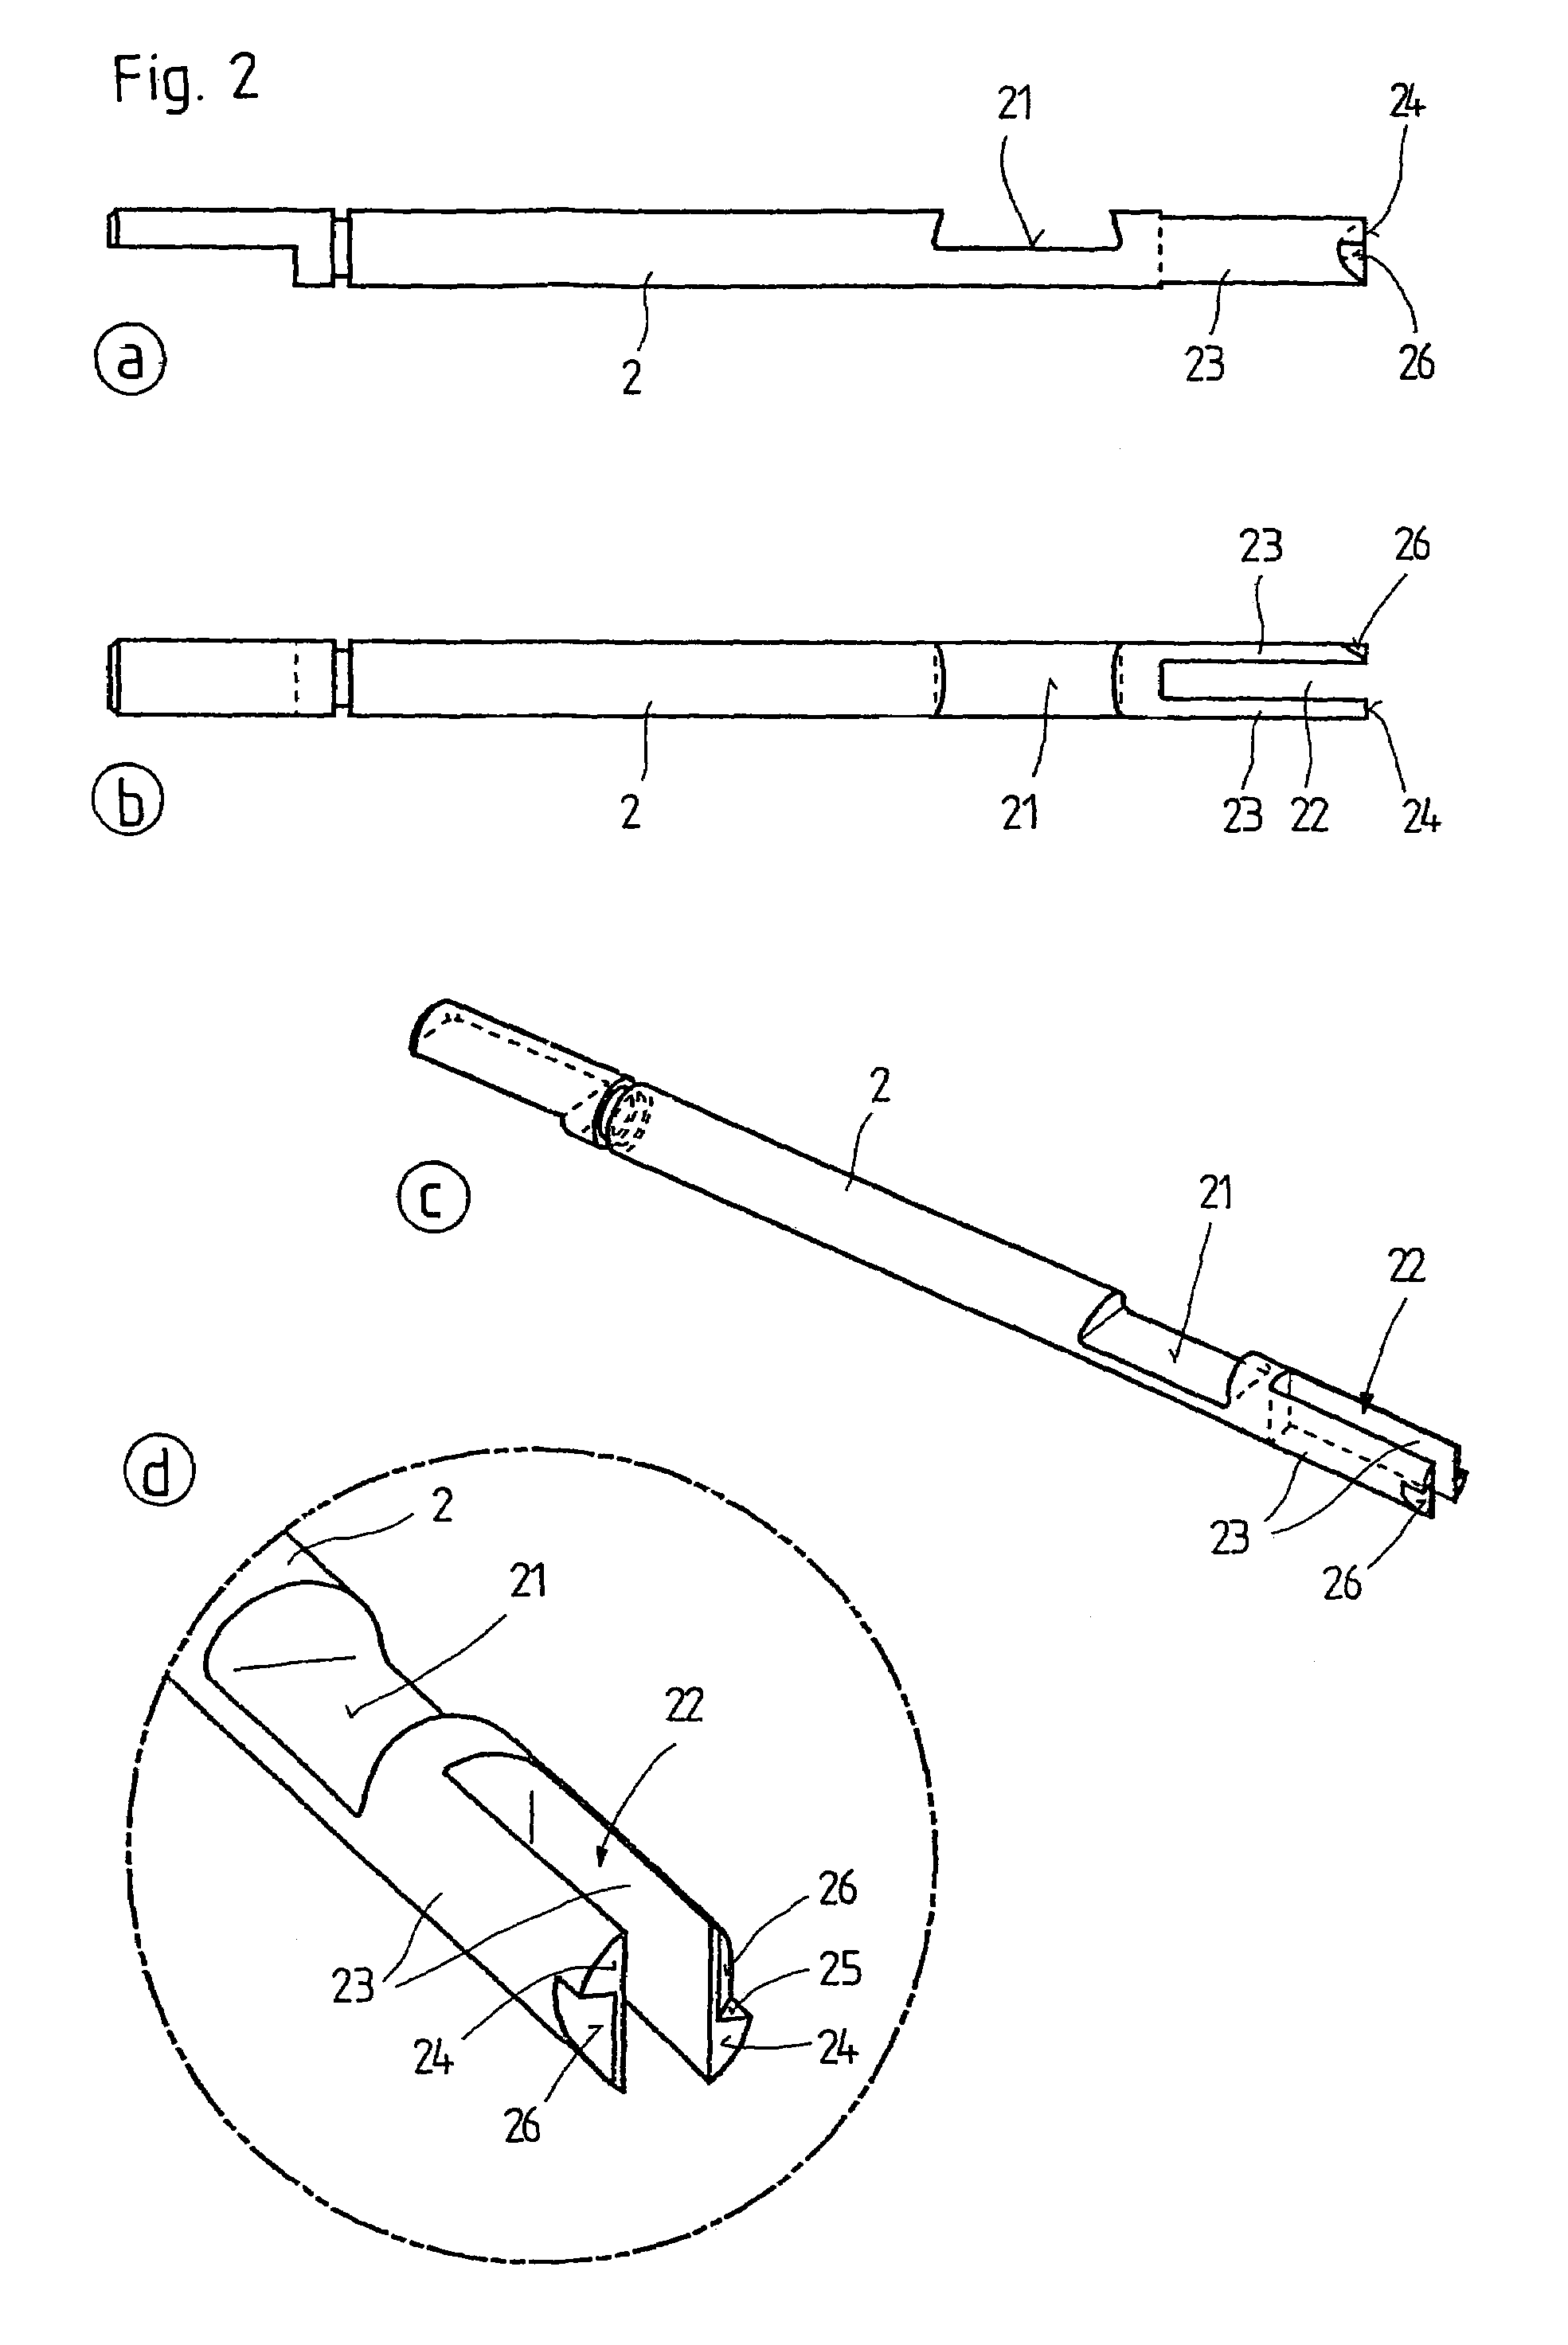 Method and device for knotting the end of a thread to a flat object